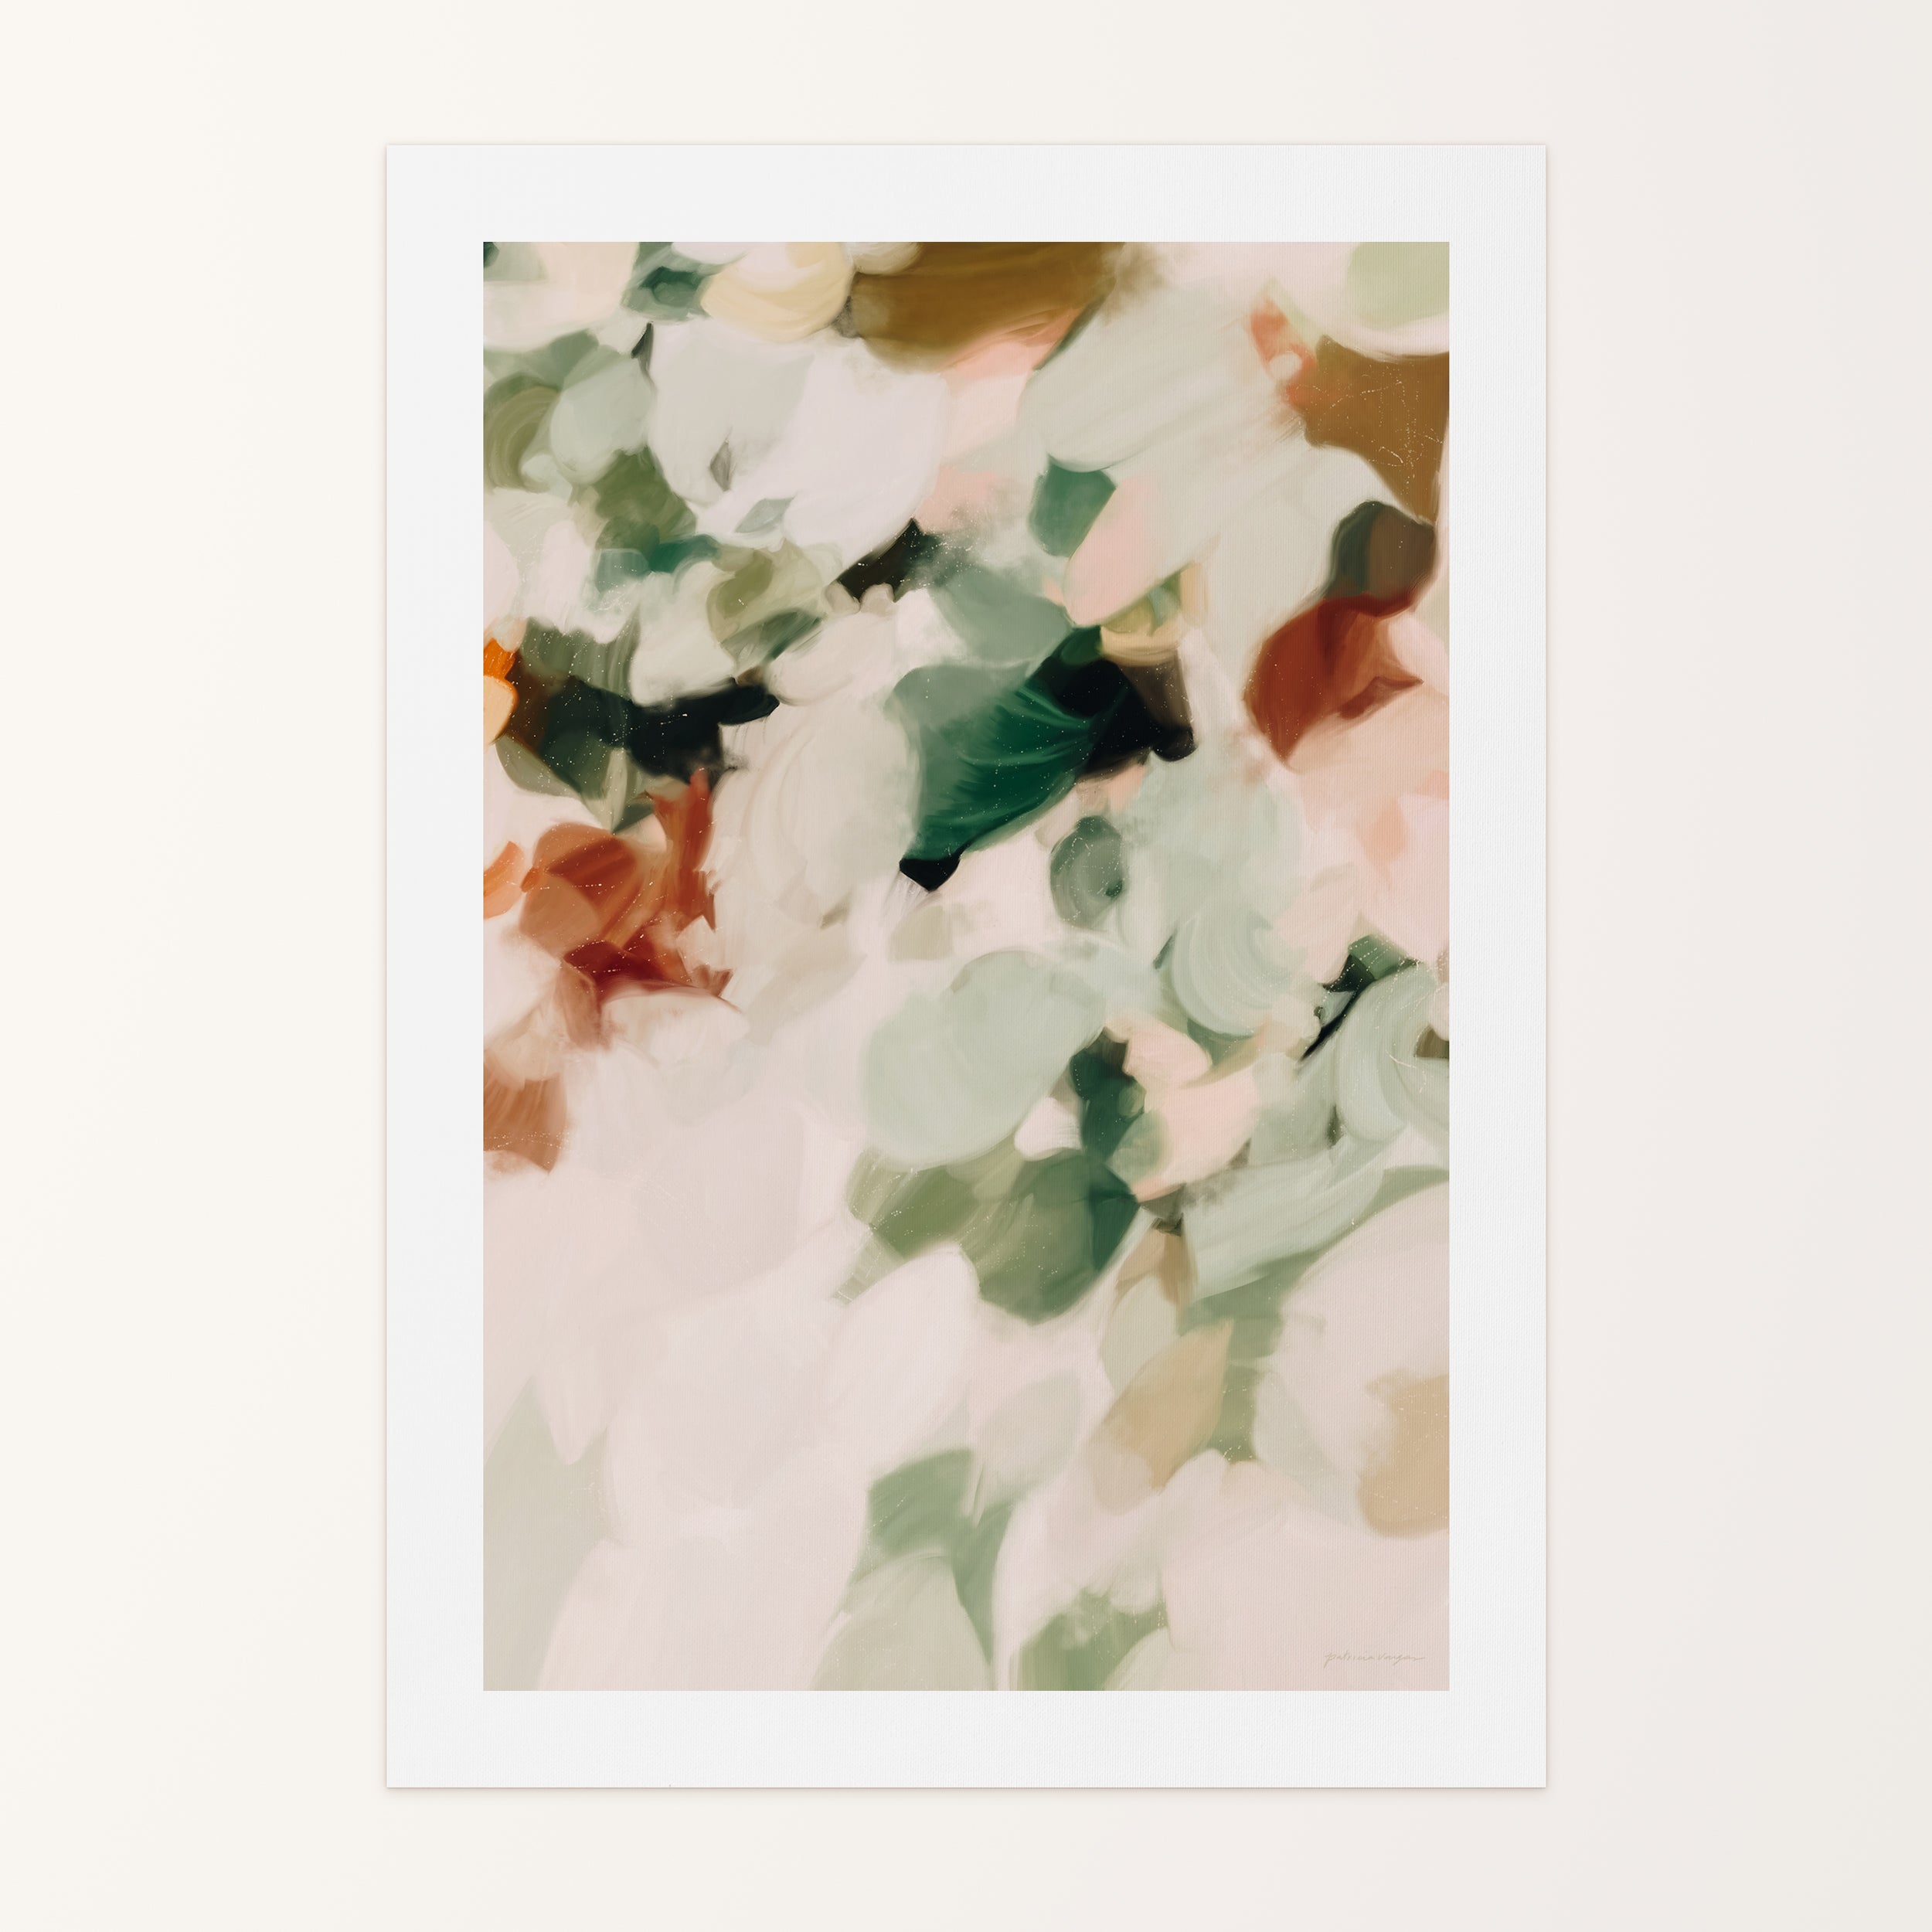 Dionne, green and brown colorful abstract canvas wall art print by Parima Studio